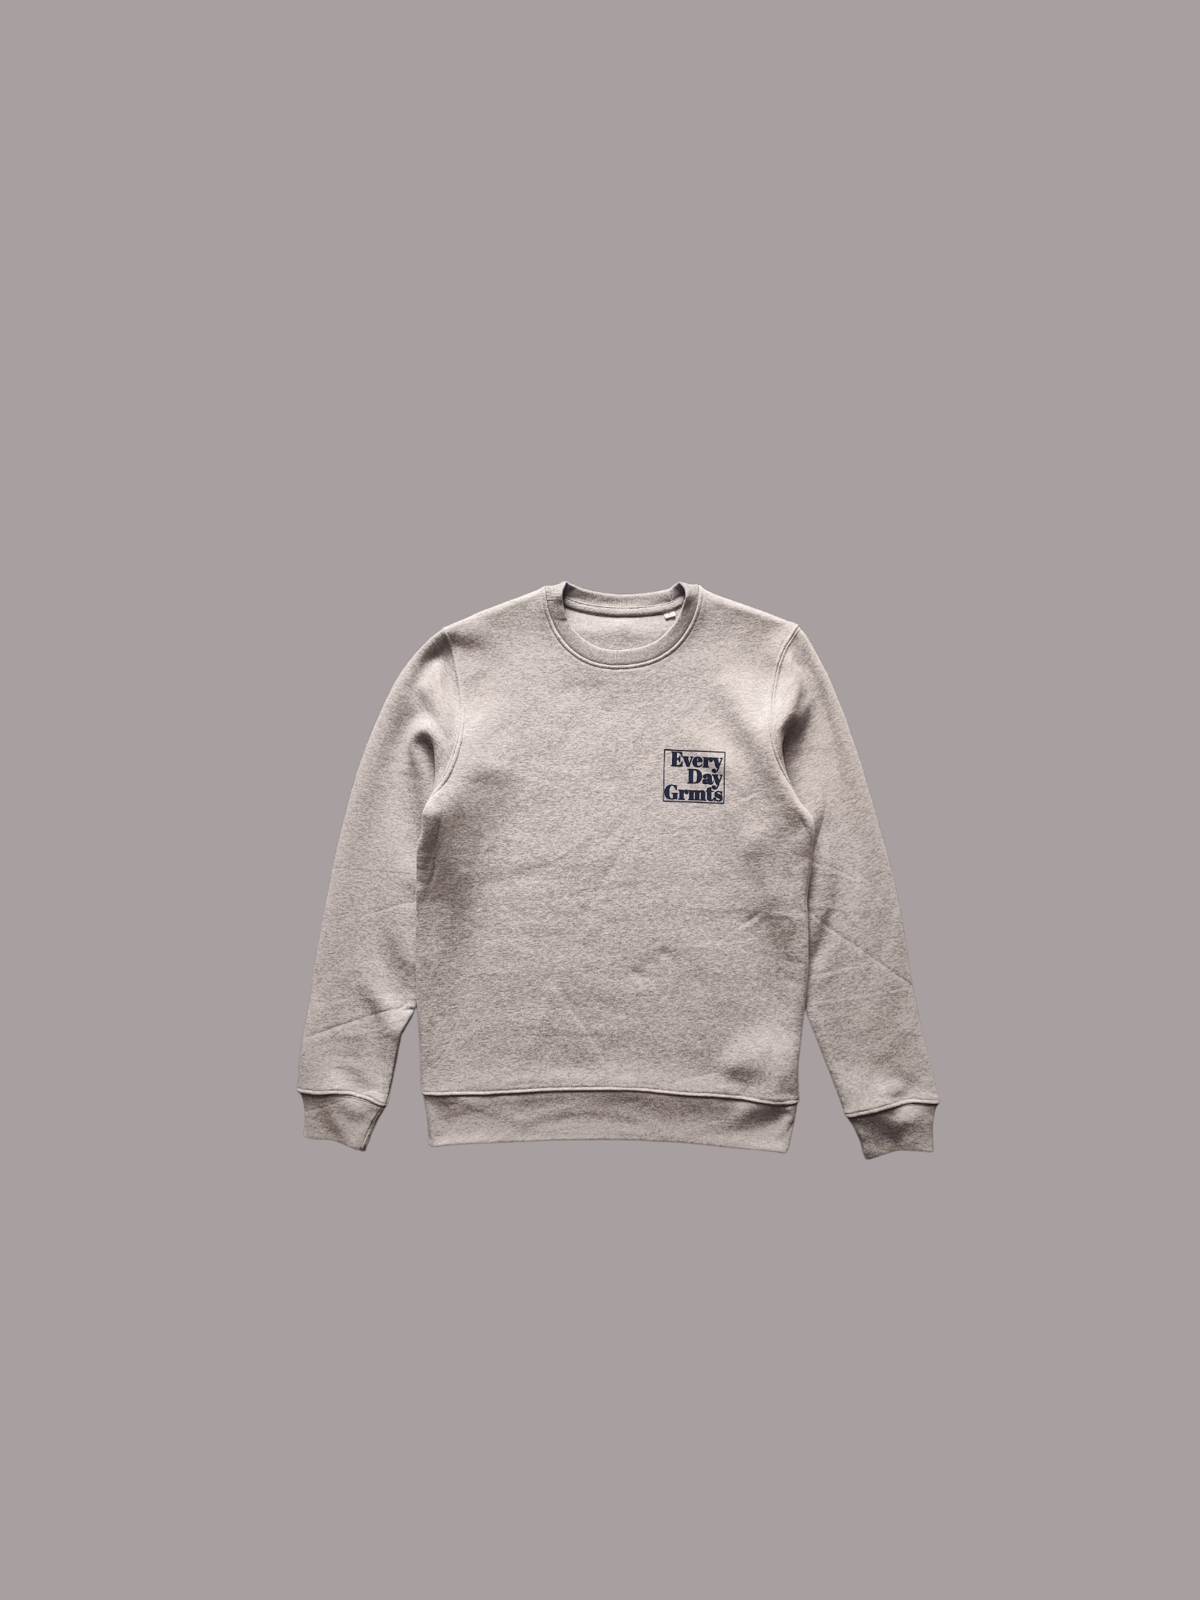 Image of Everyday Garments Sweaters